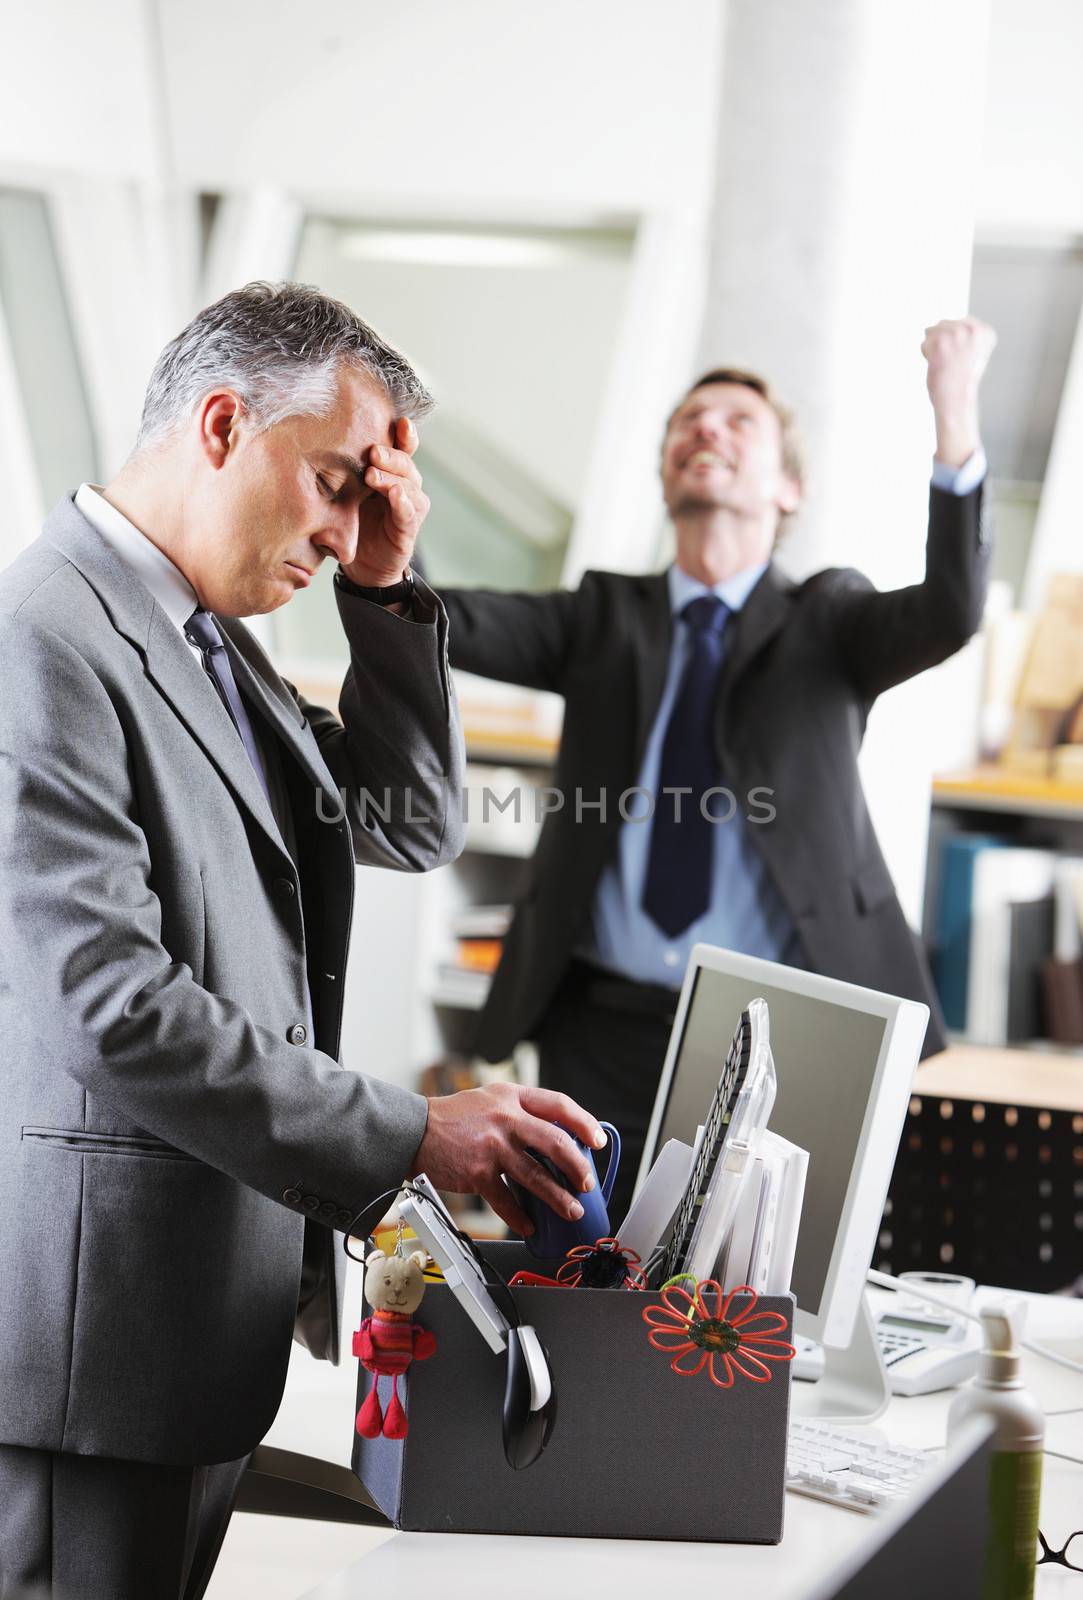 Dejected fired office worker. His colleague is celebrating on the background